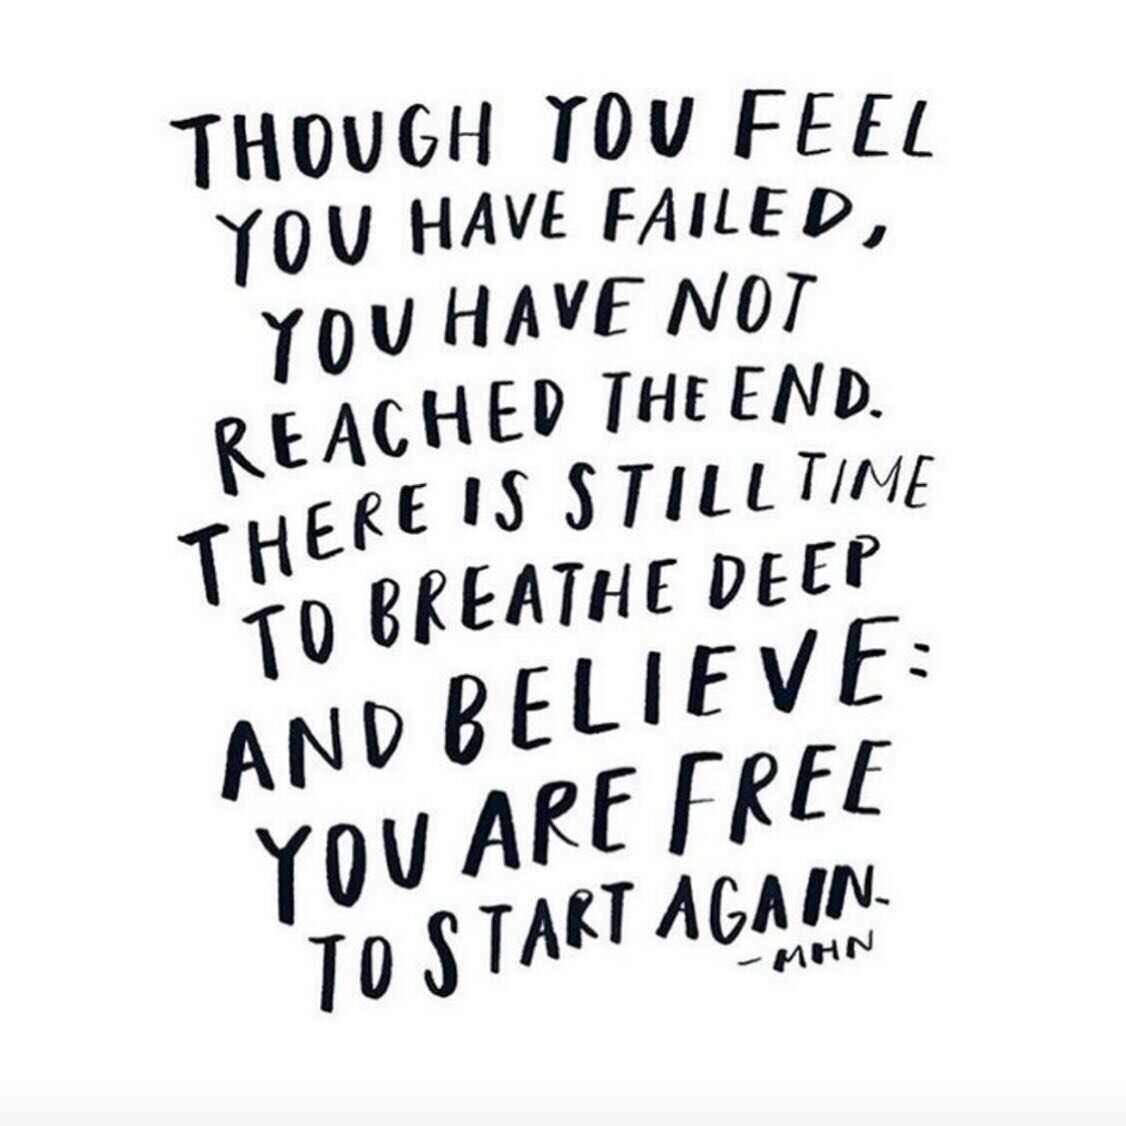 You are ✨FREE✨ to start again, to continue on, to pick up right where you left off.
These past two weeks I&rsquo;ve had the honour of sitting &amp; mentoring some of my scs gang through a plethora of obstacles &amp; barriers to moving for their minds